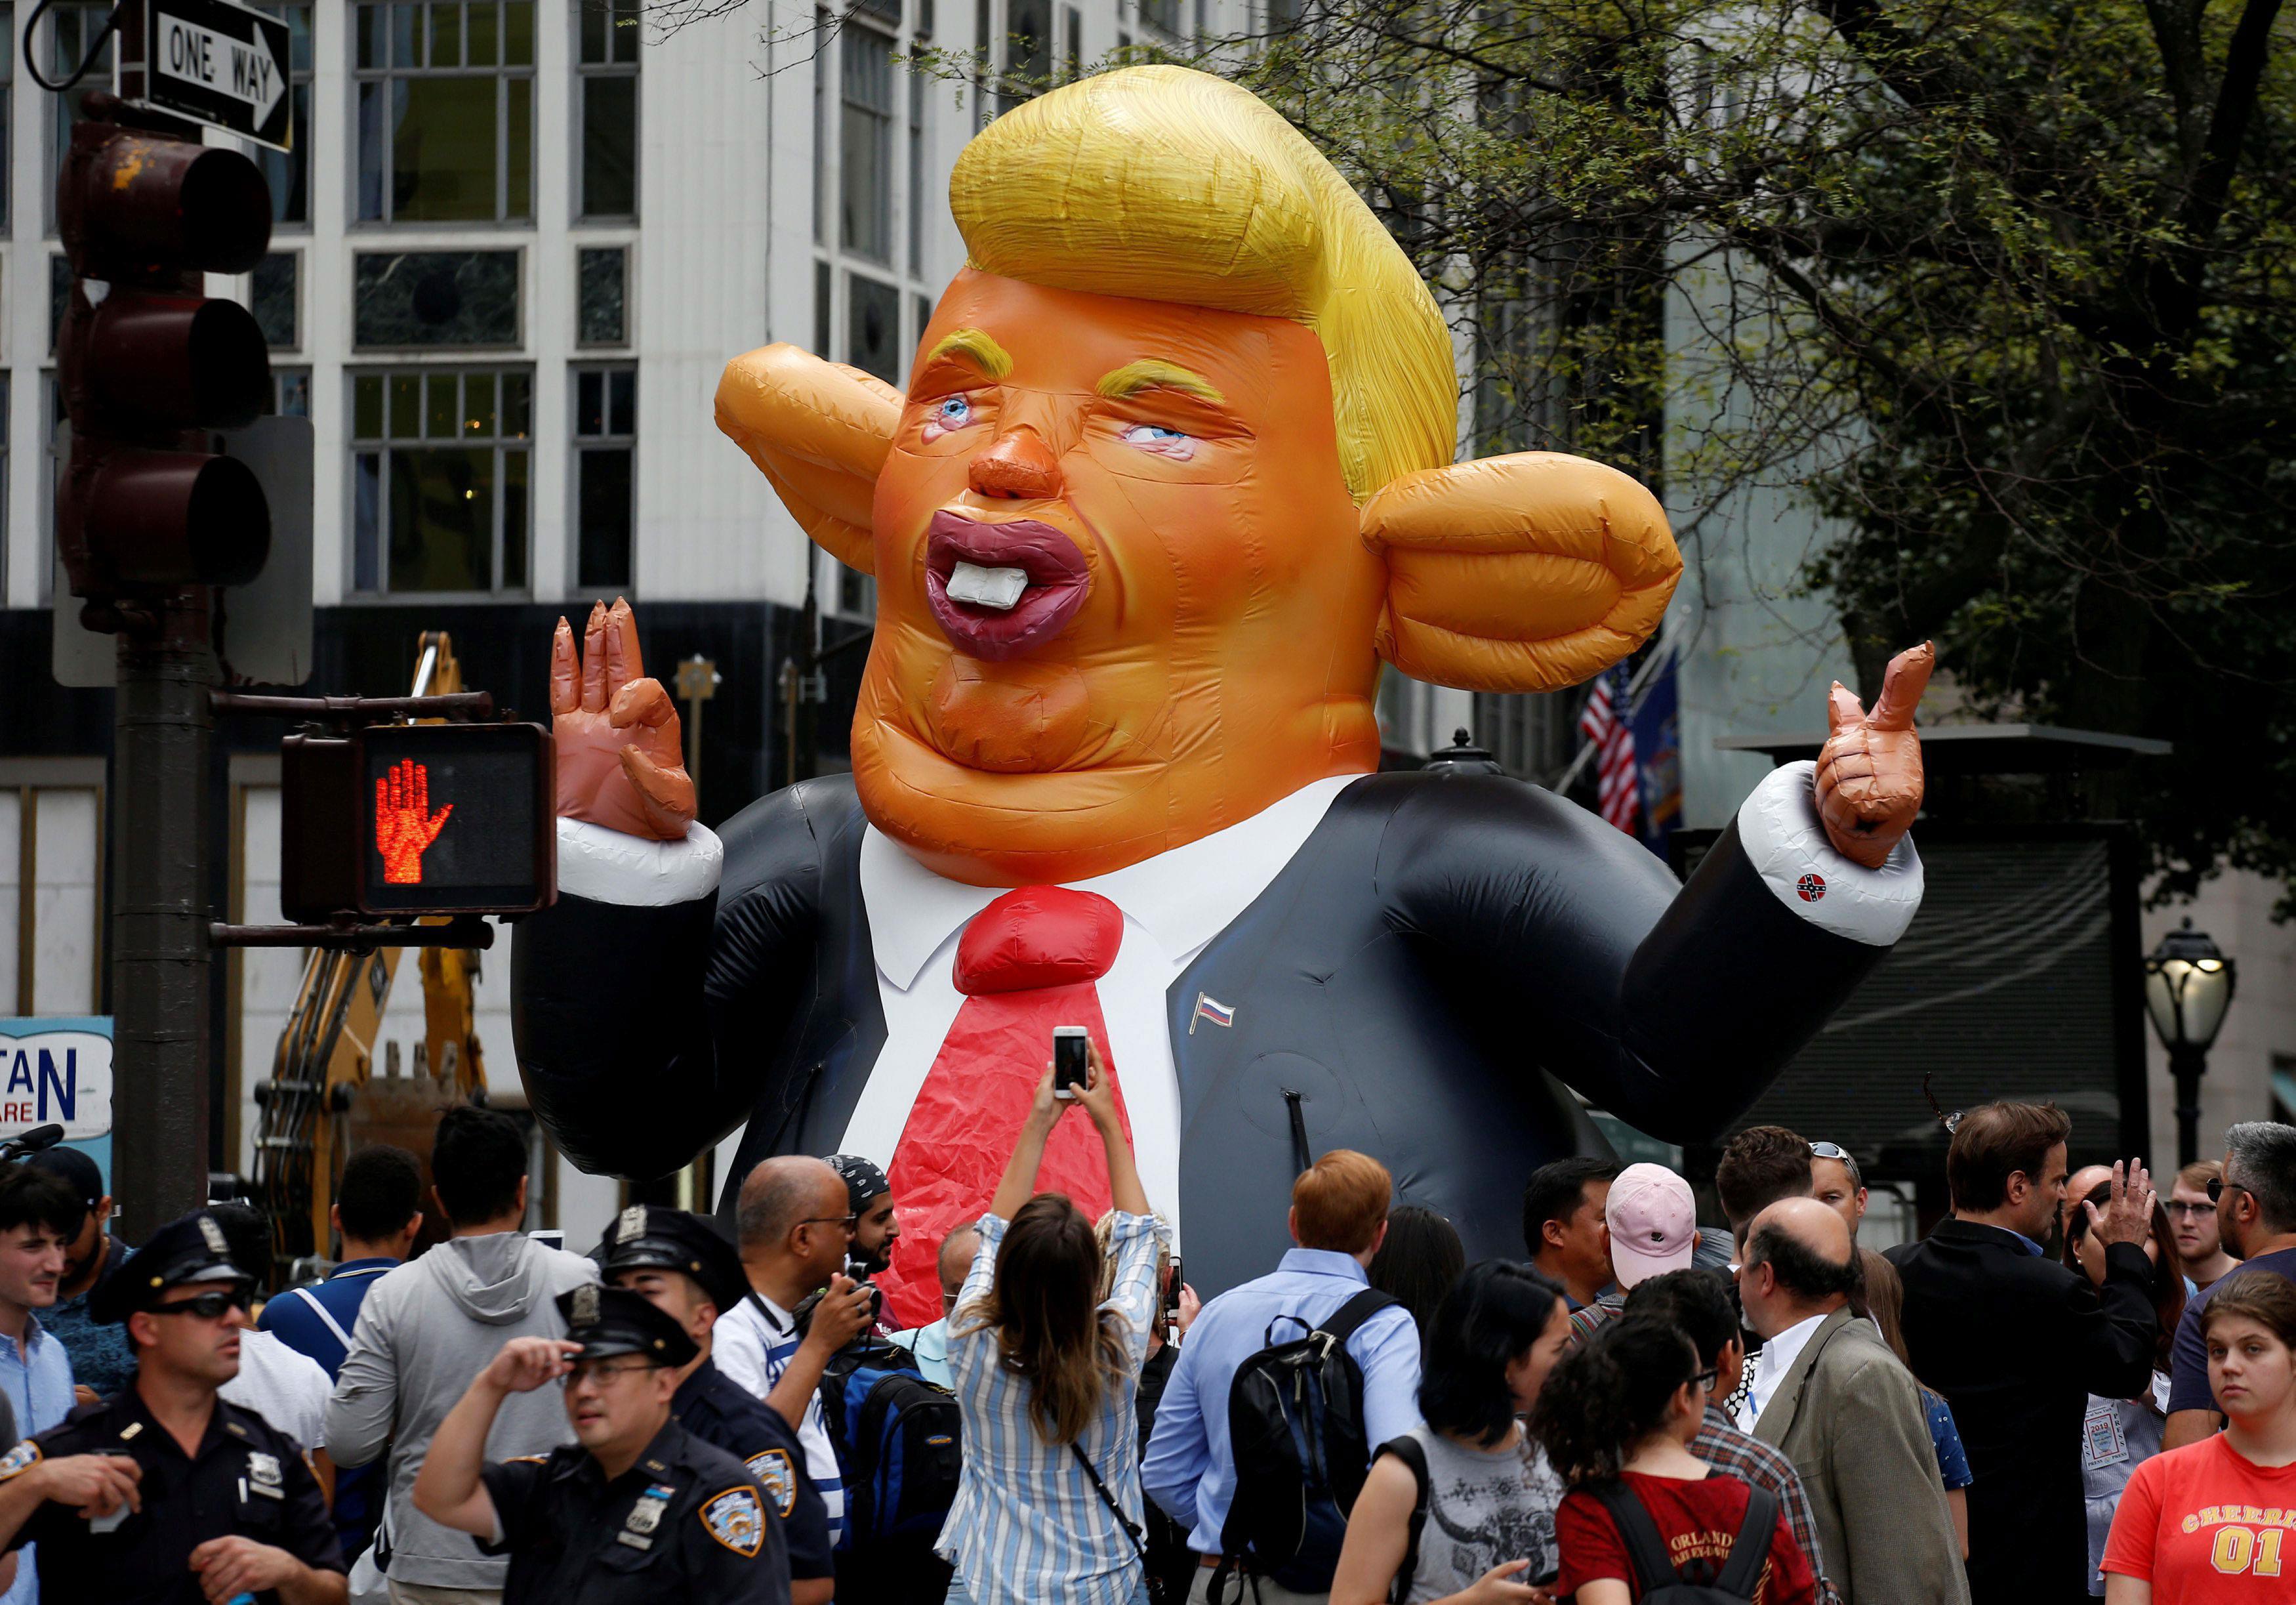 People looks at a giant inflatable rat in the likeness of U.S. President Donald Trump, displayed nea